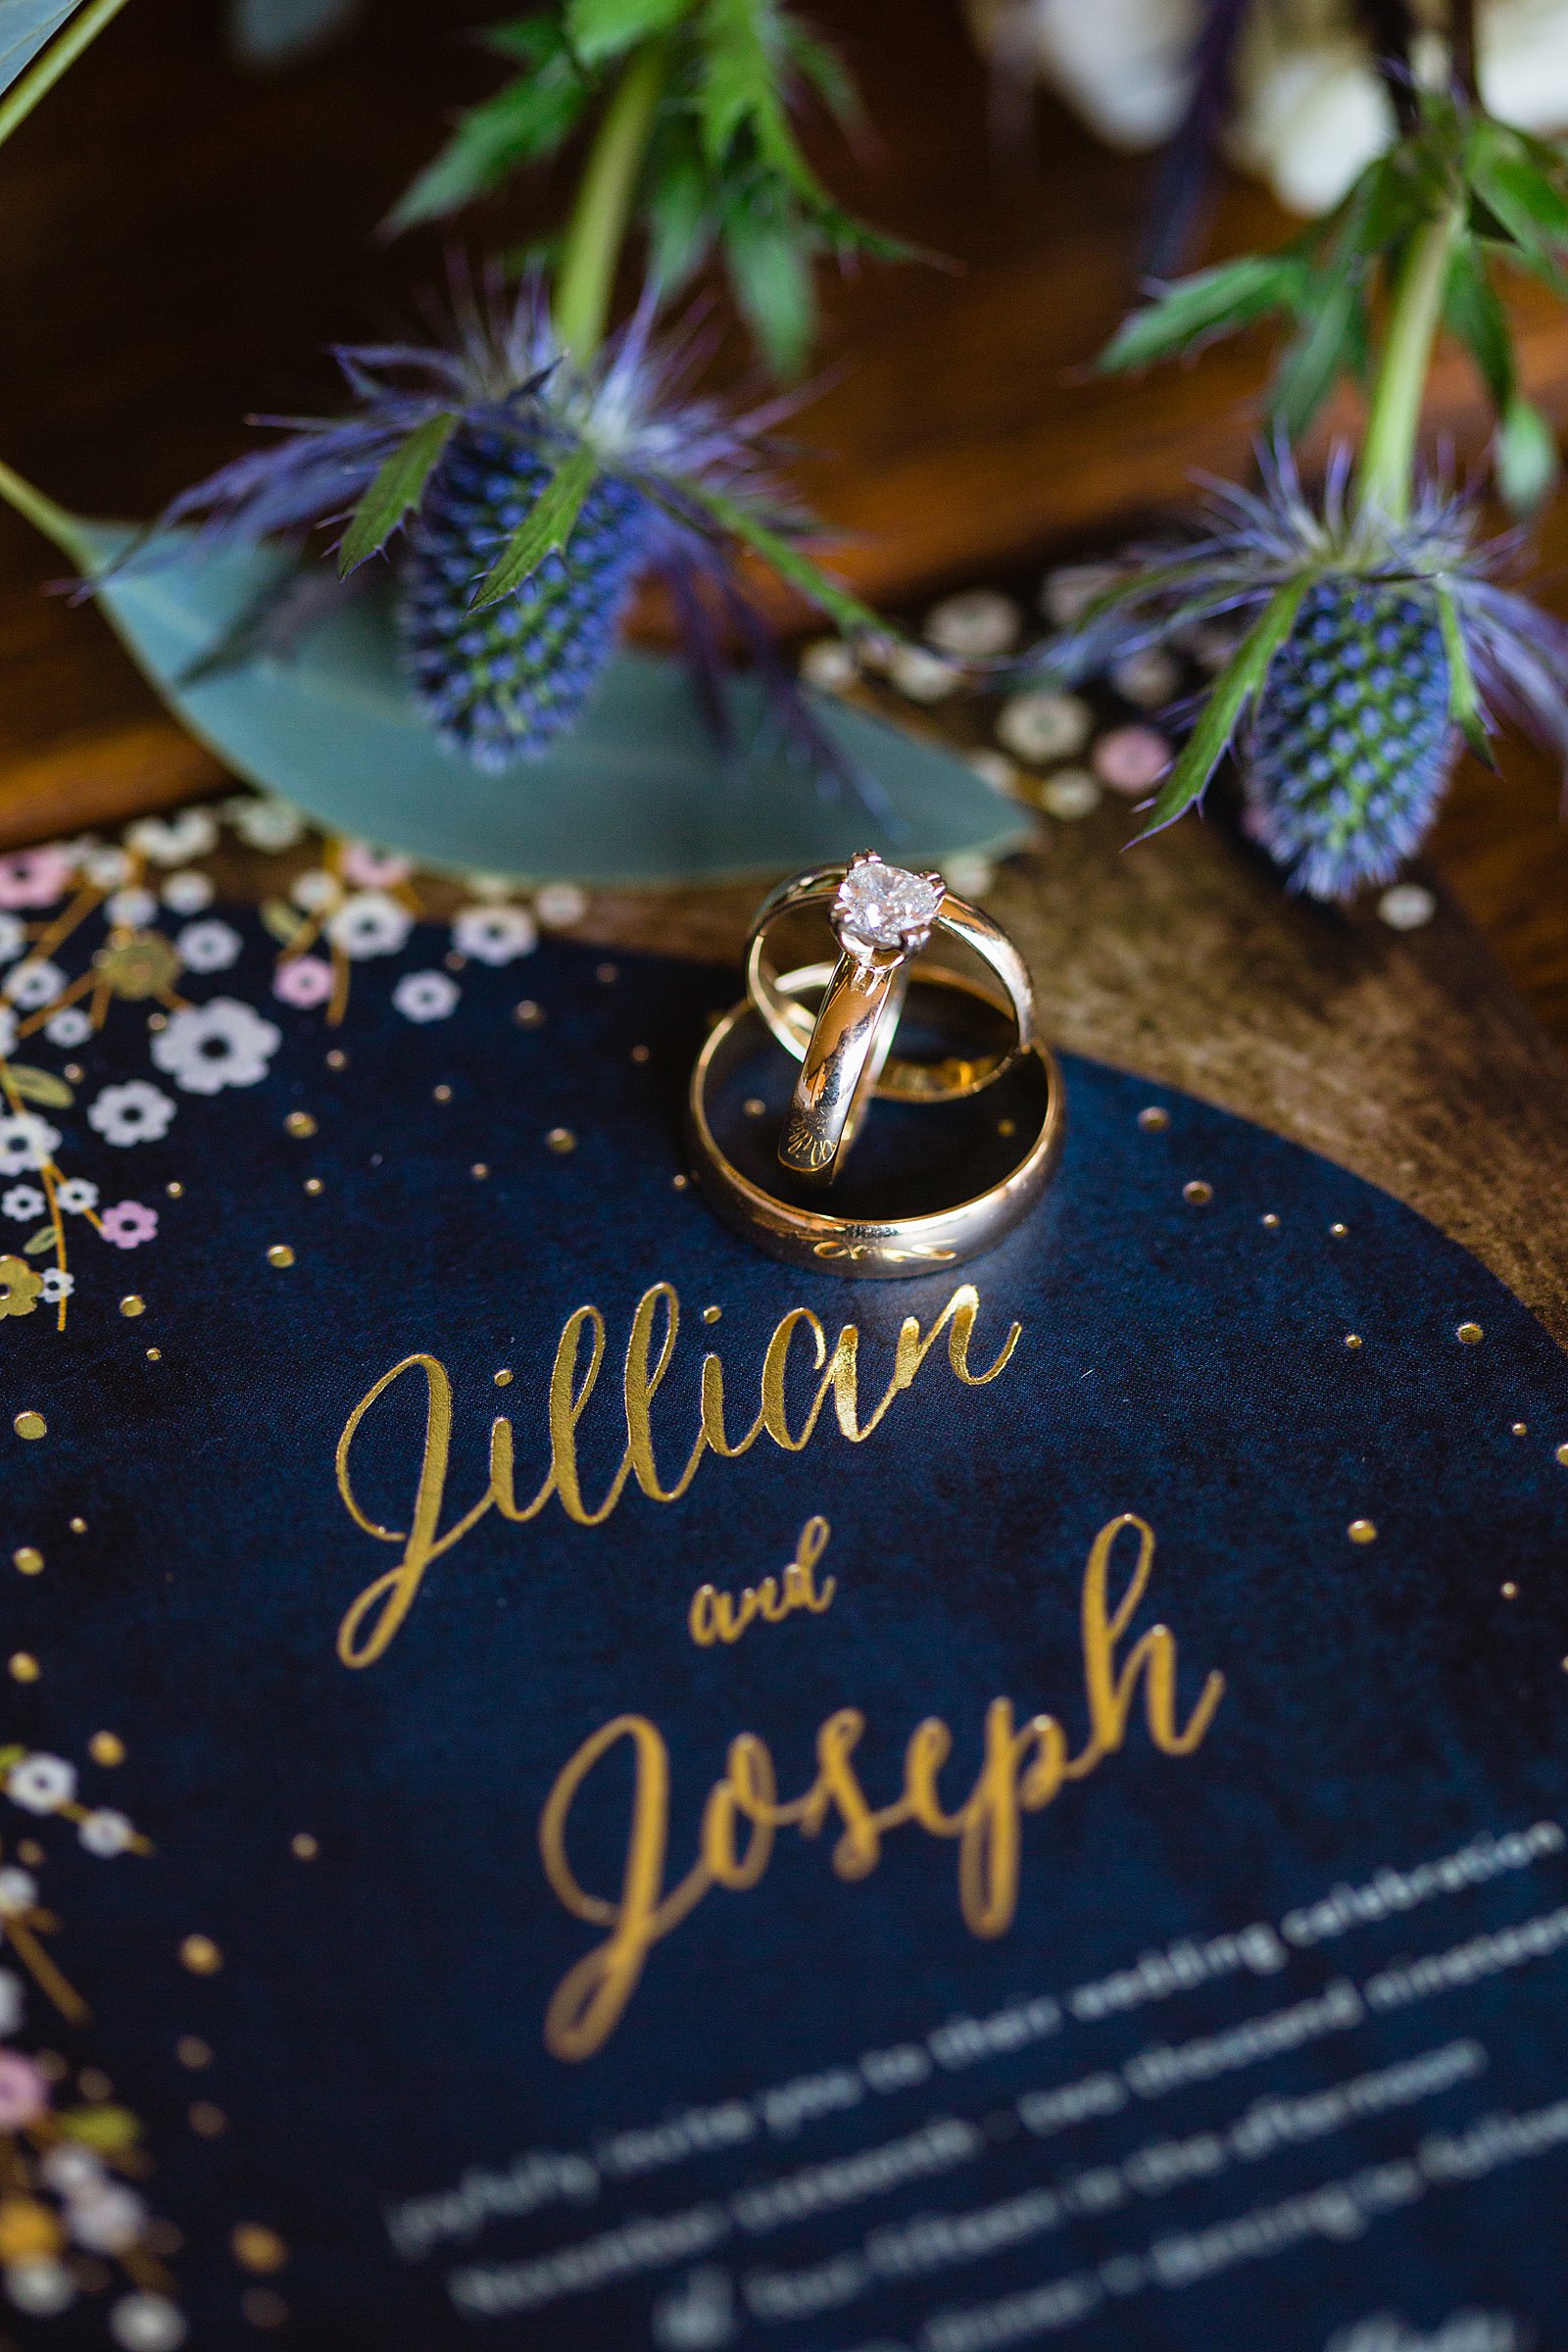 Romantic gold and navy wedding invitation with simple gold matching wedding rings by Phoenix wedding photographer PMA Photography.